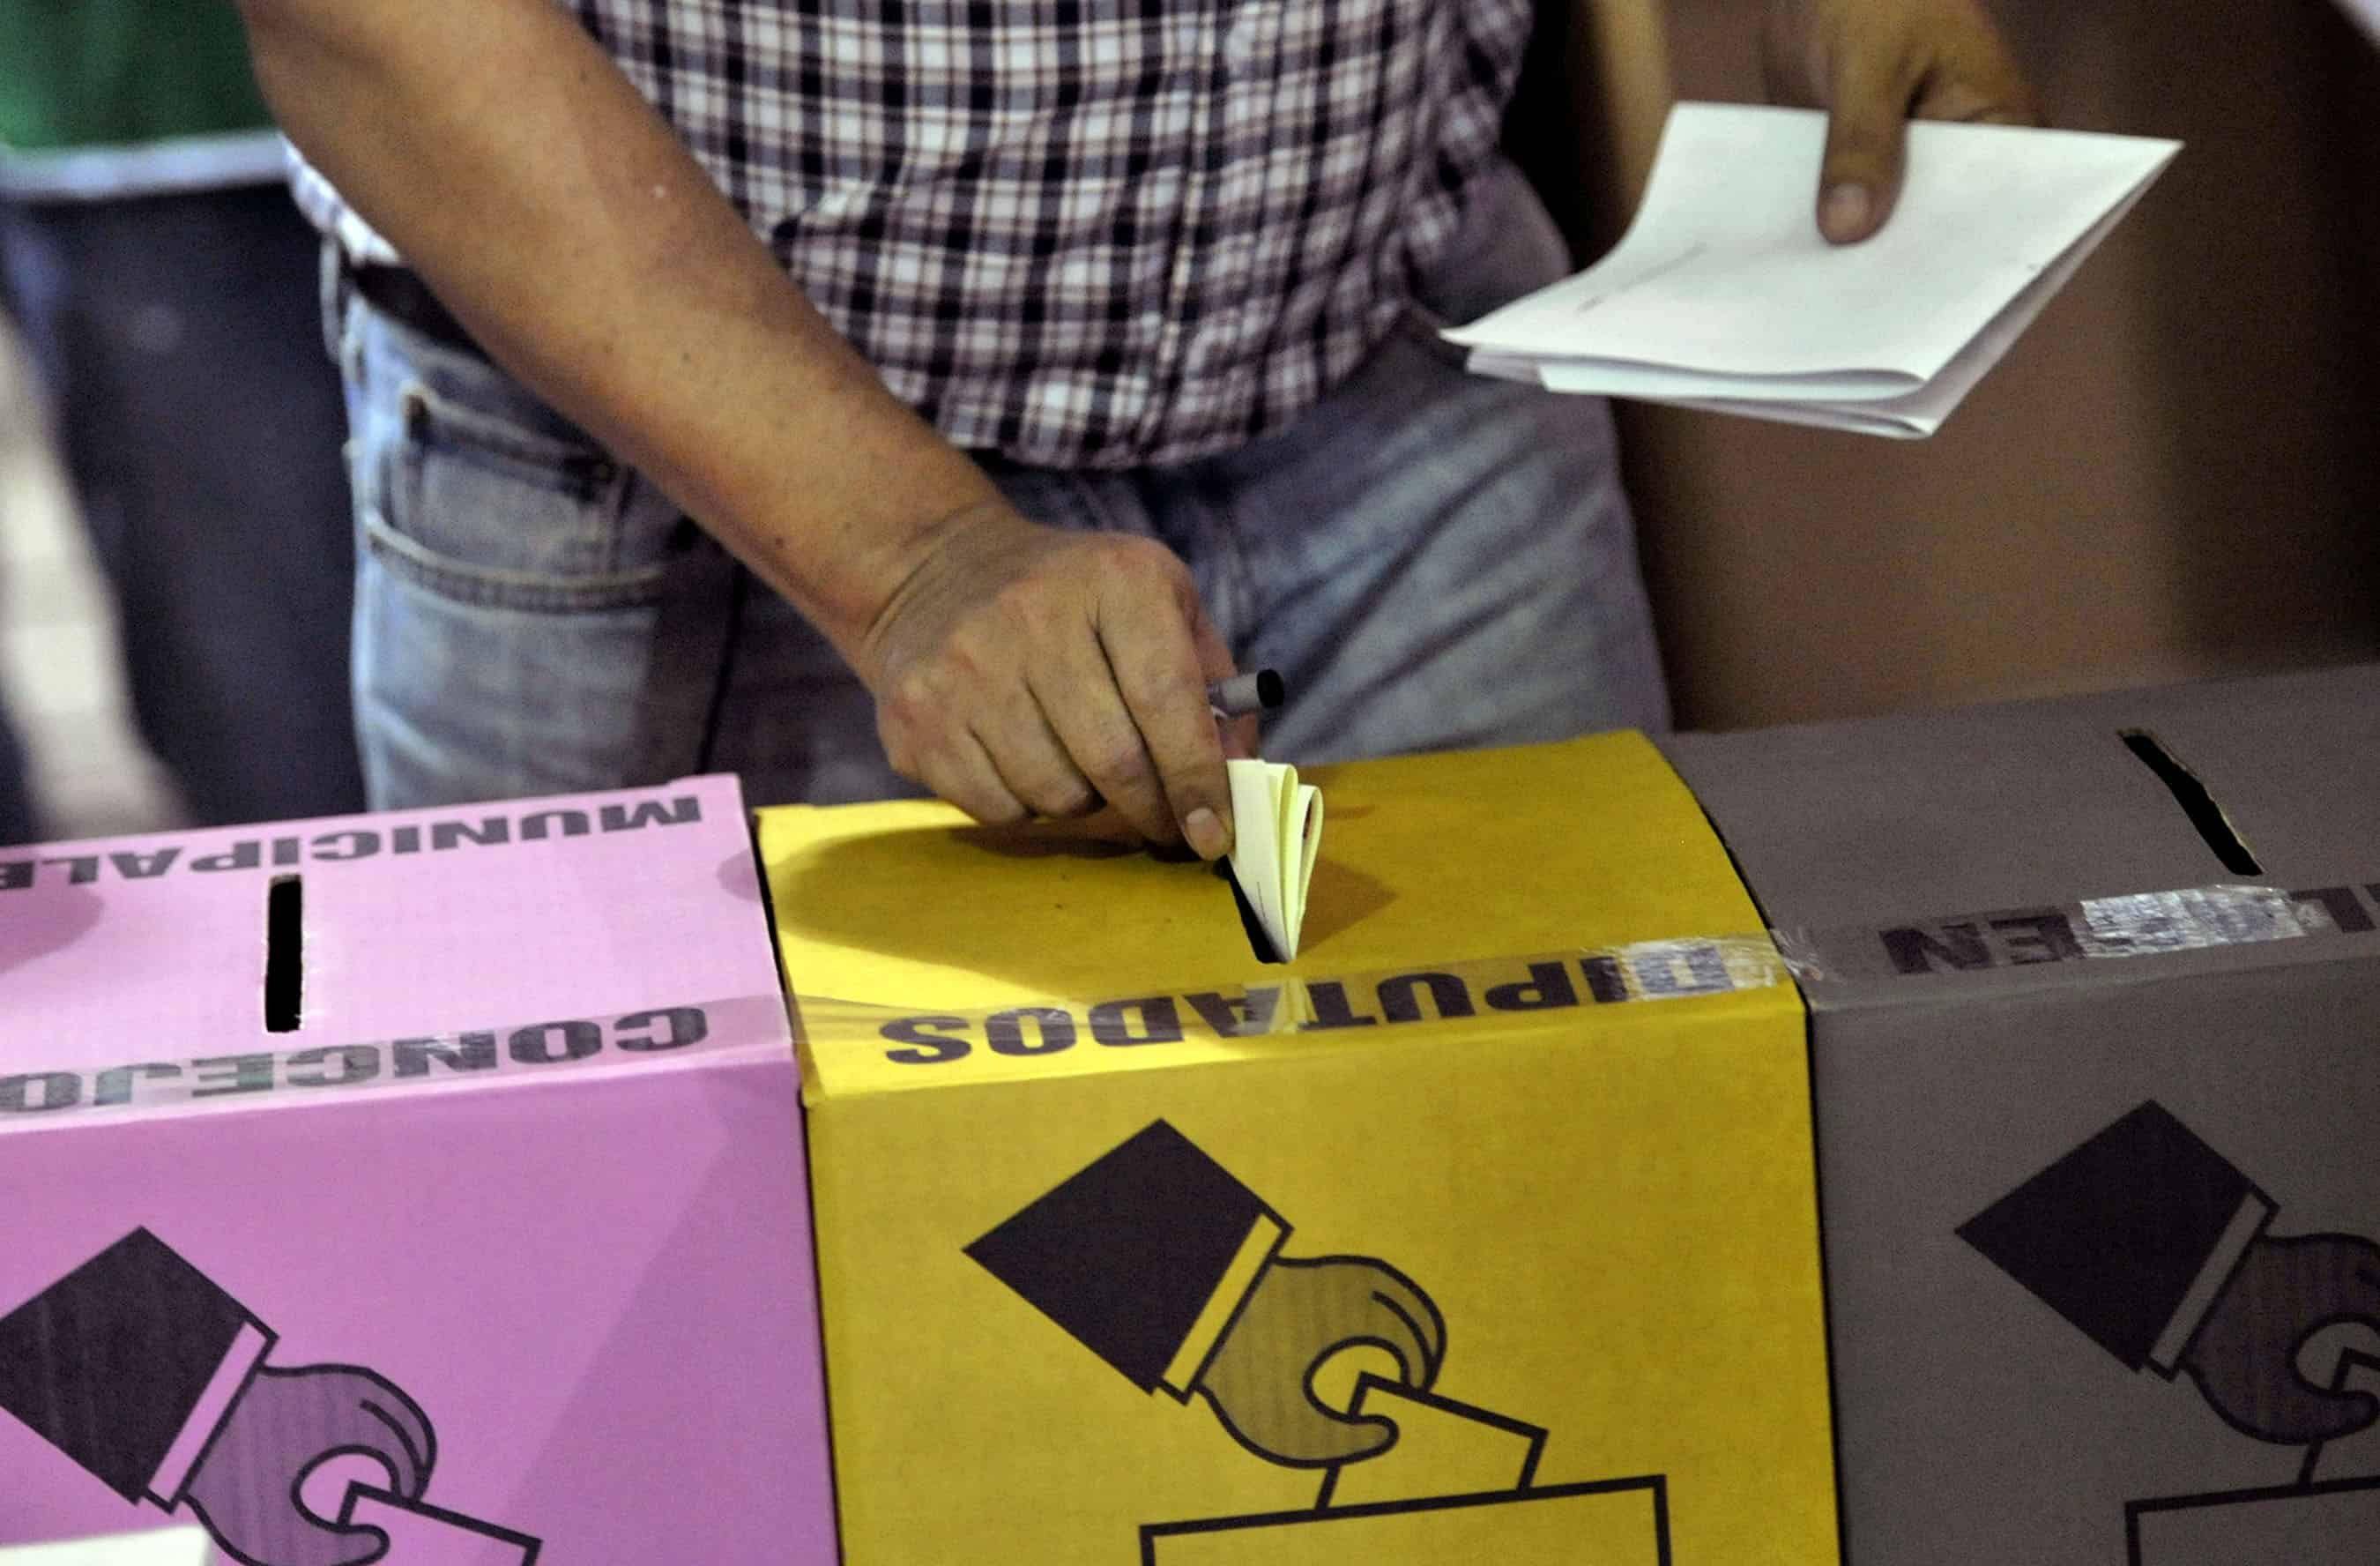 A man casts his vote during legislative and municipal elections on March 1, 2015 in San Salvador.